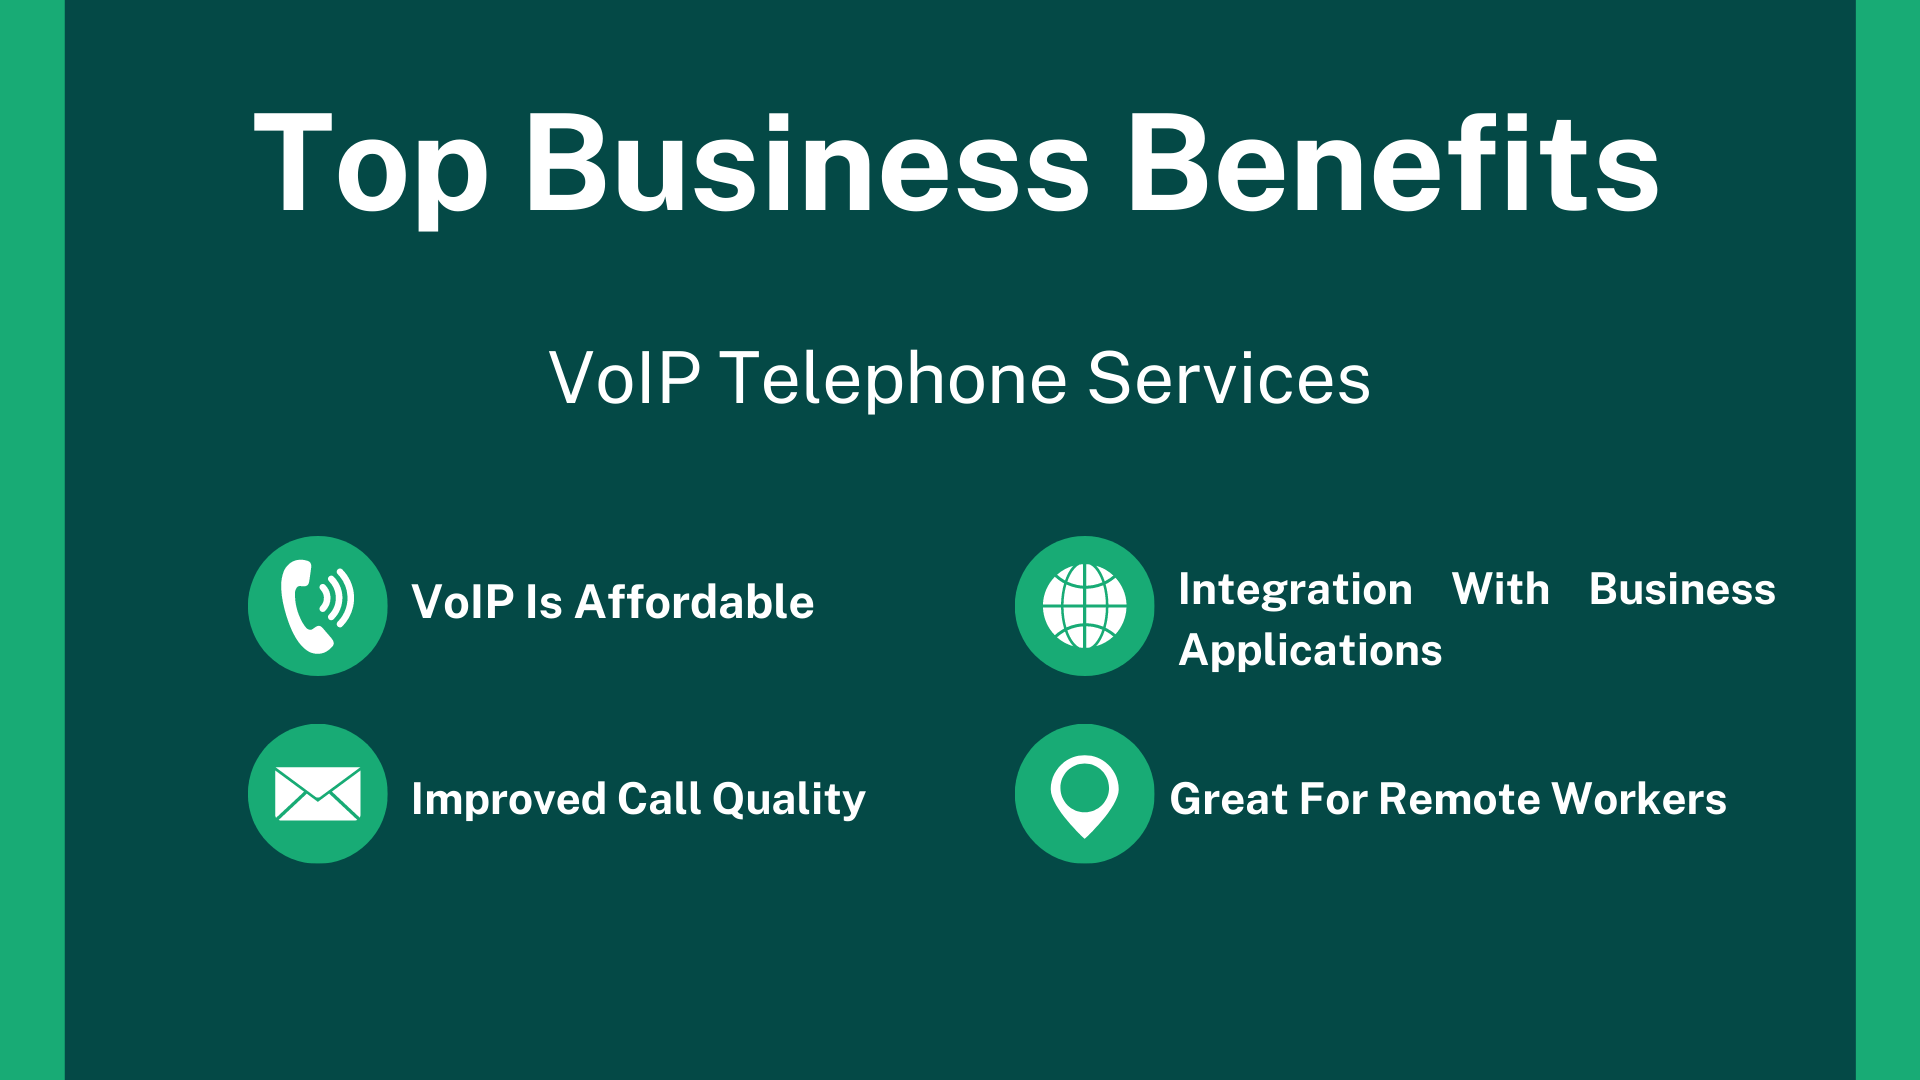 VoIP Telephone Services